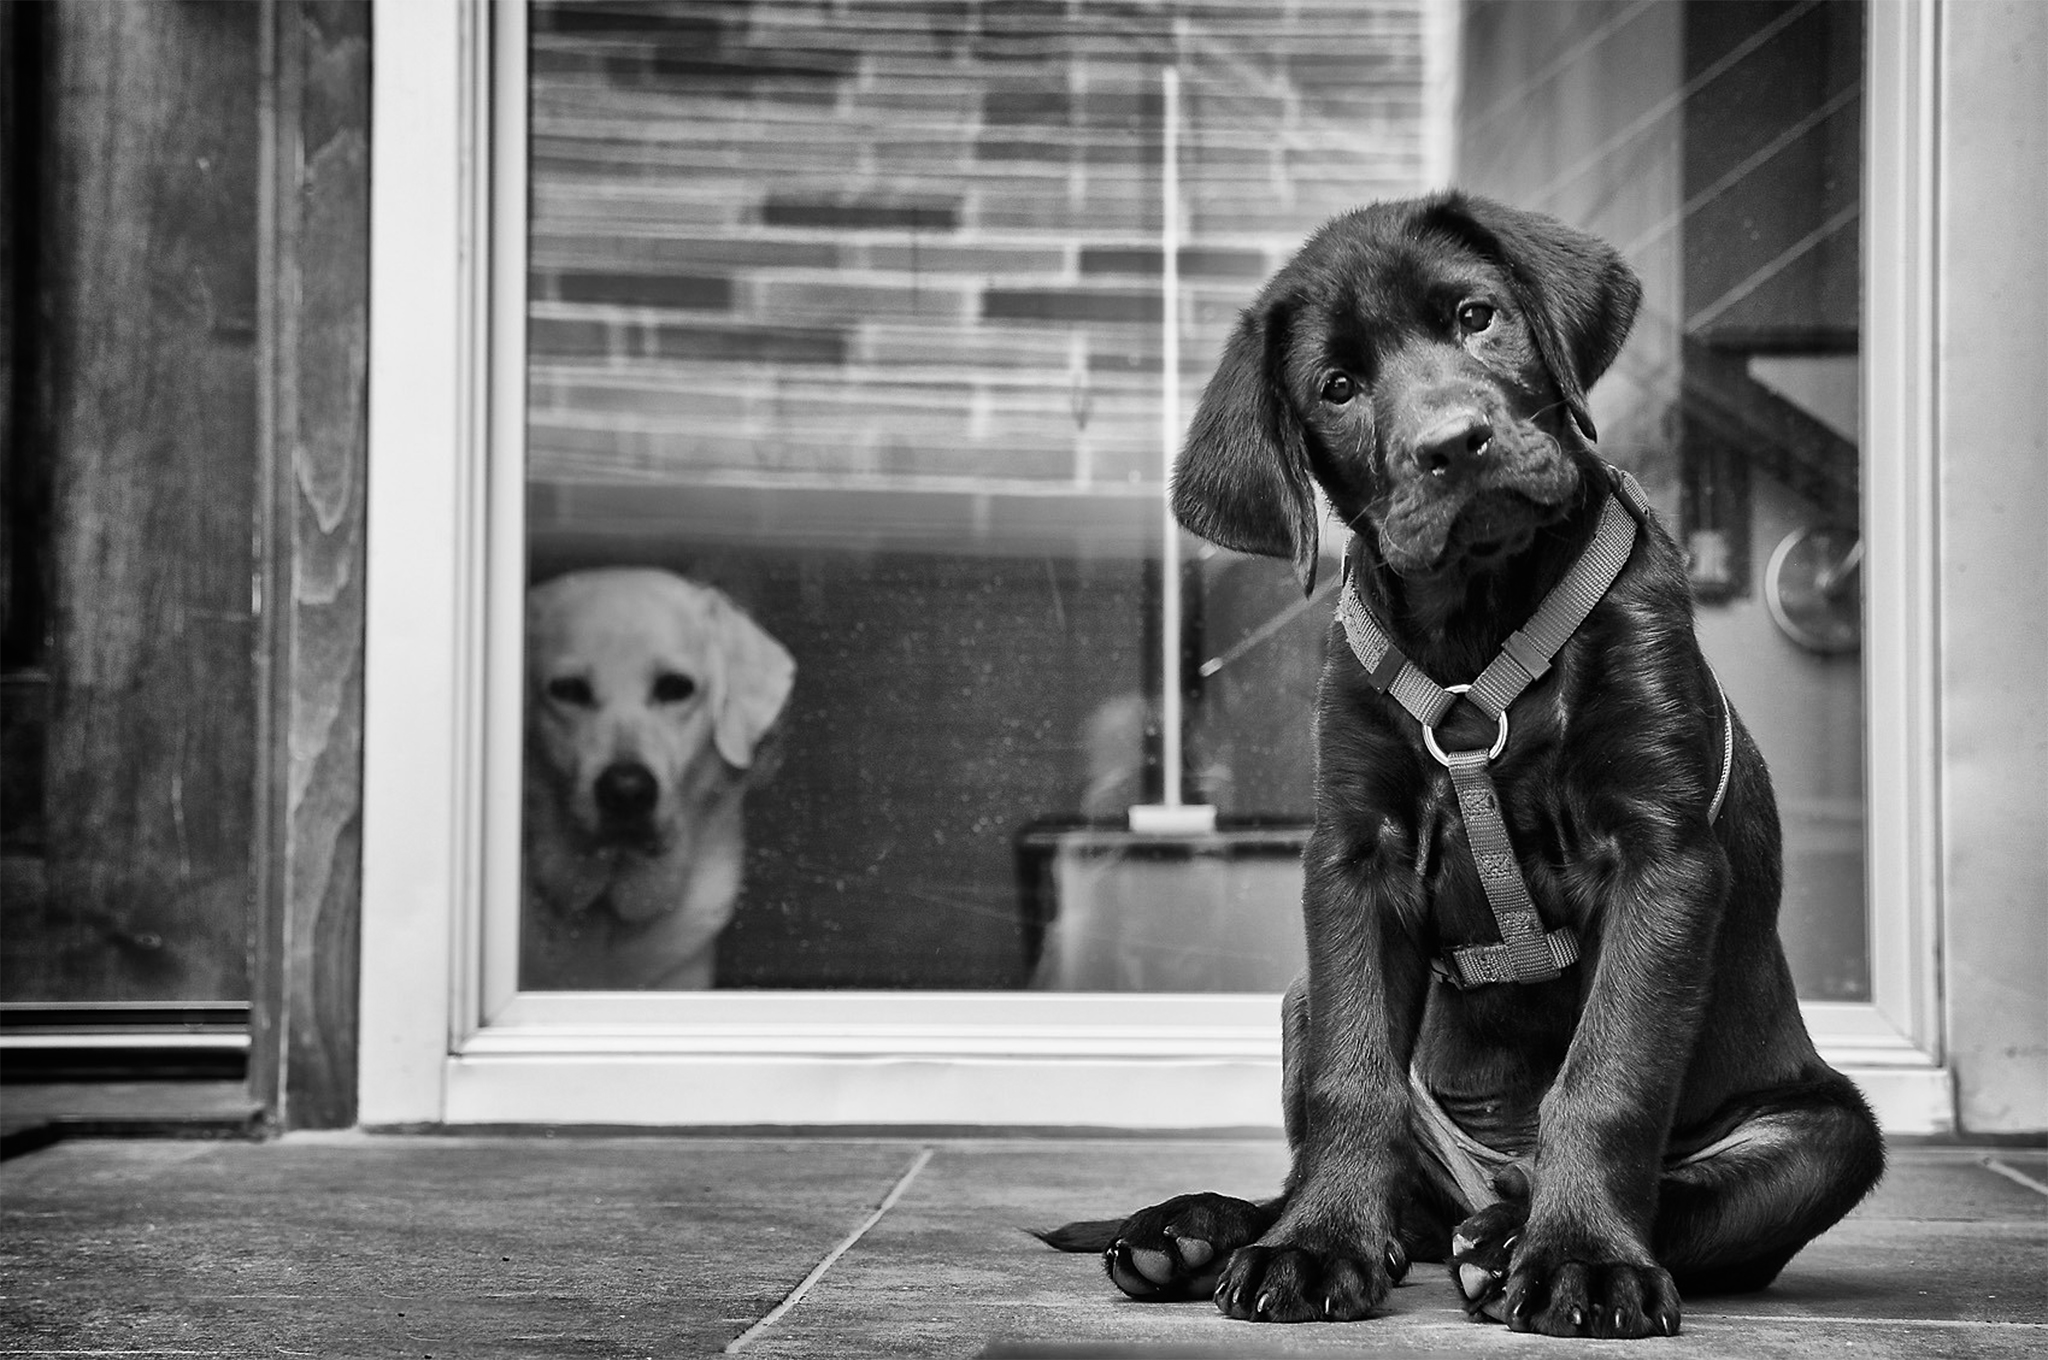 After almost nine years of the being the only dog in the house, and one which I photograph daily (she is my muse and supermodel), Scout peers out the window as I photograph the new puppy Kal.